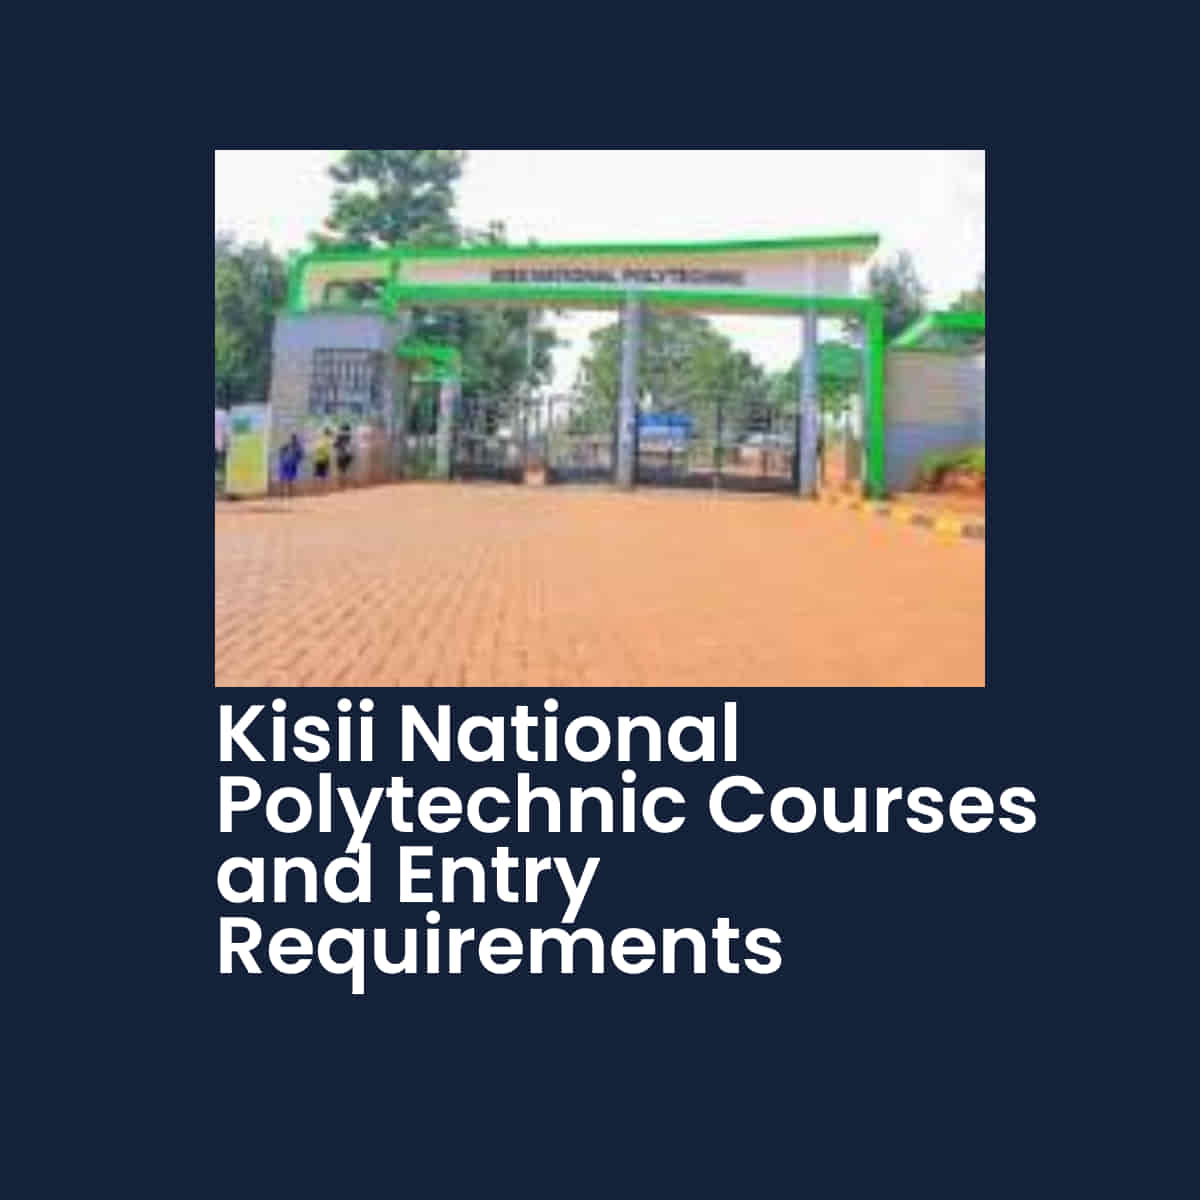 Kisii National Polytechnic courses and entry requirements